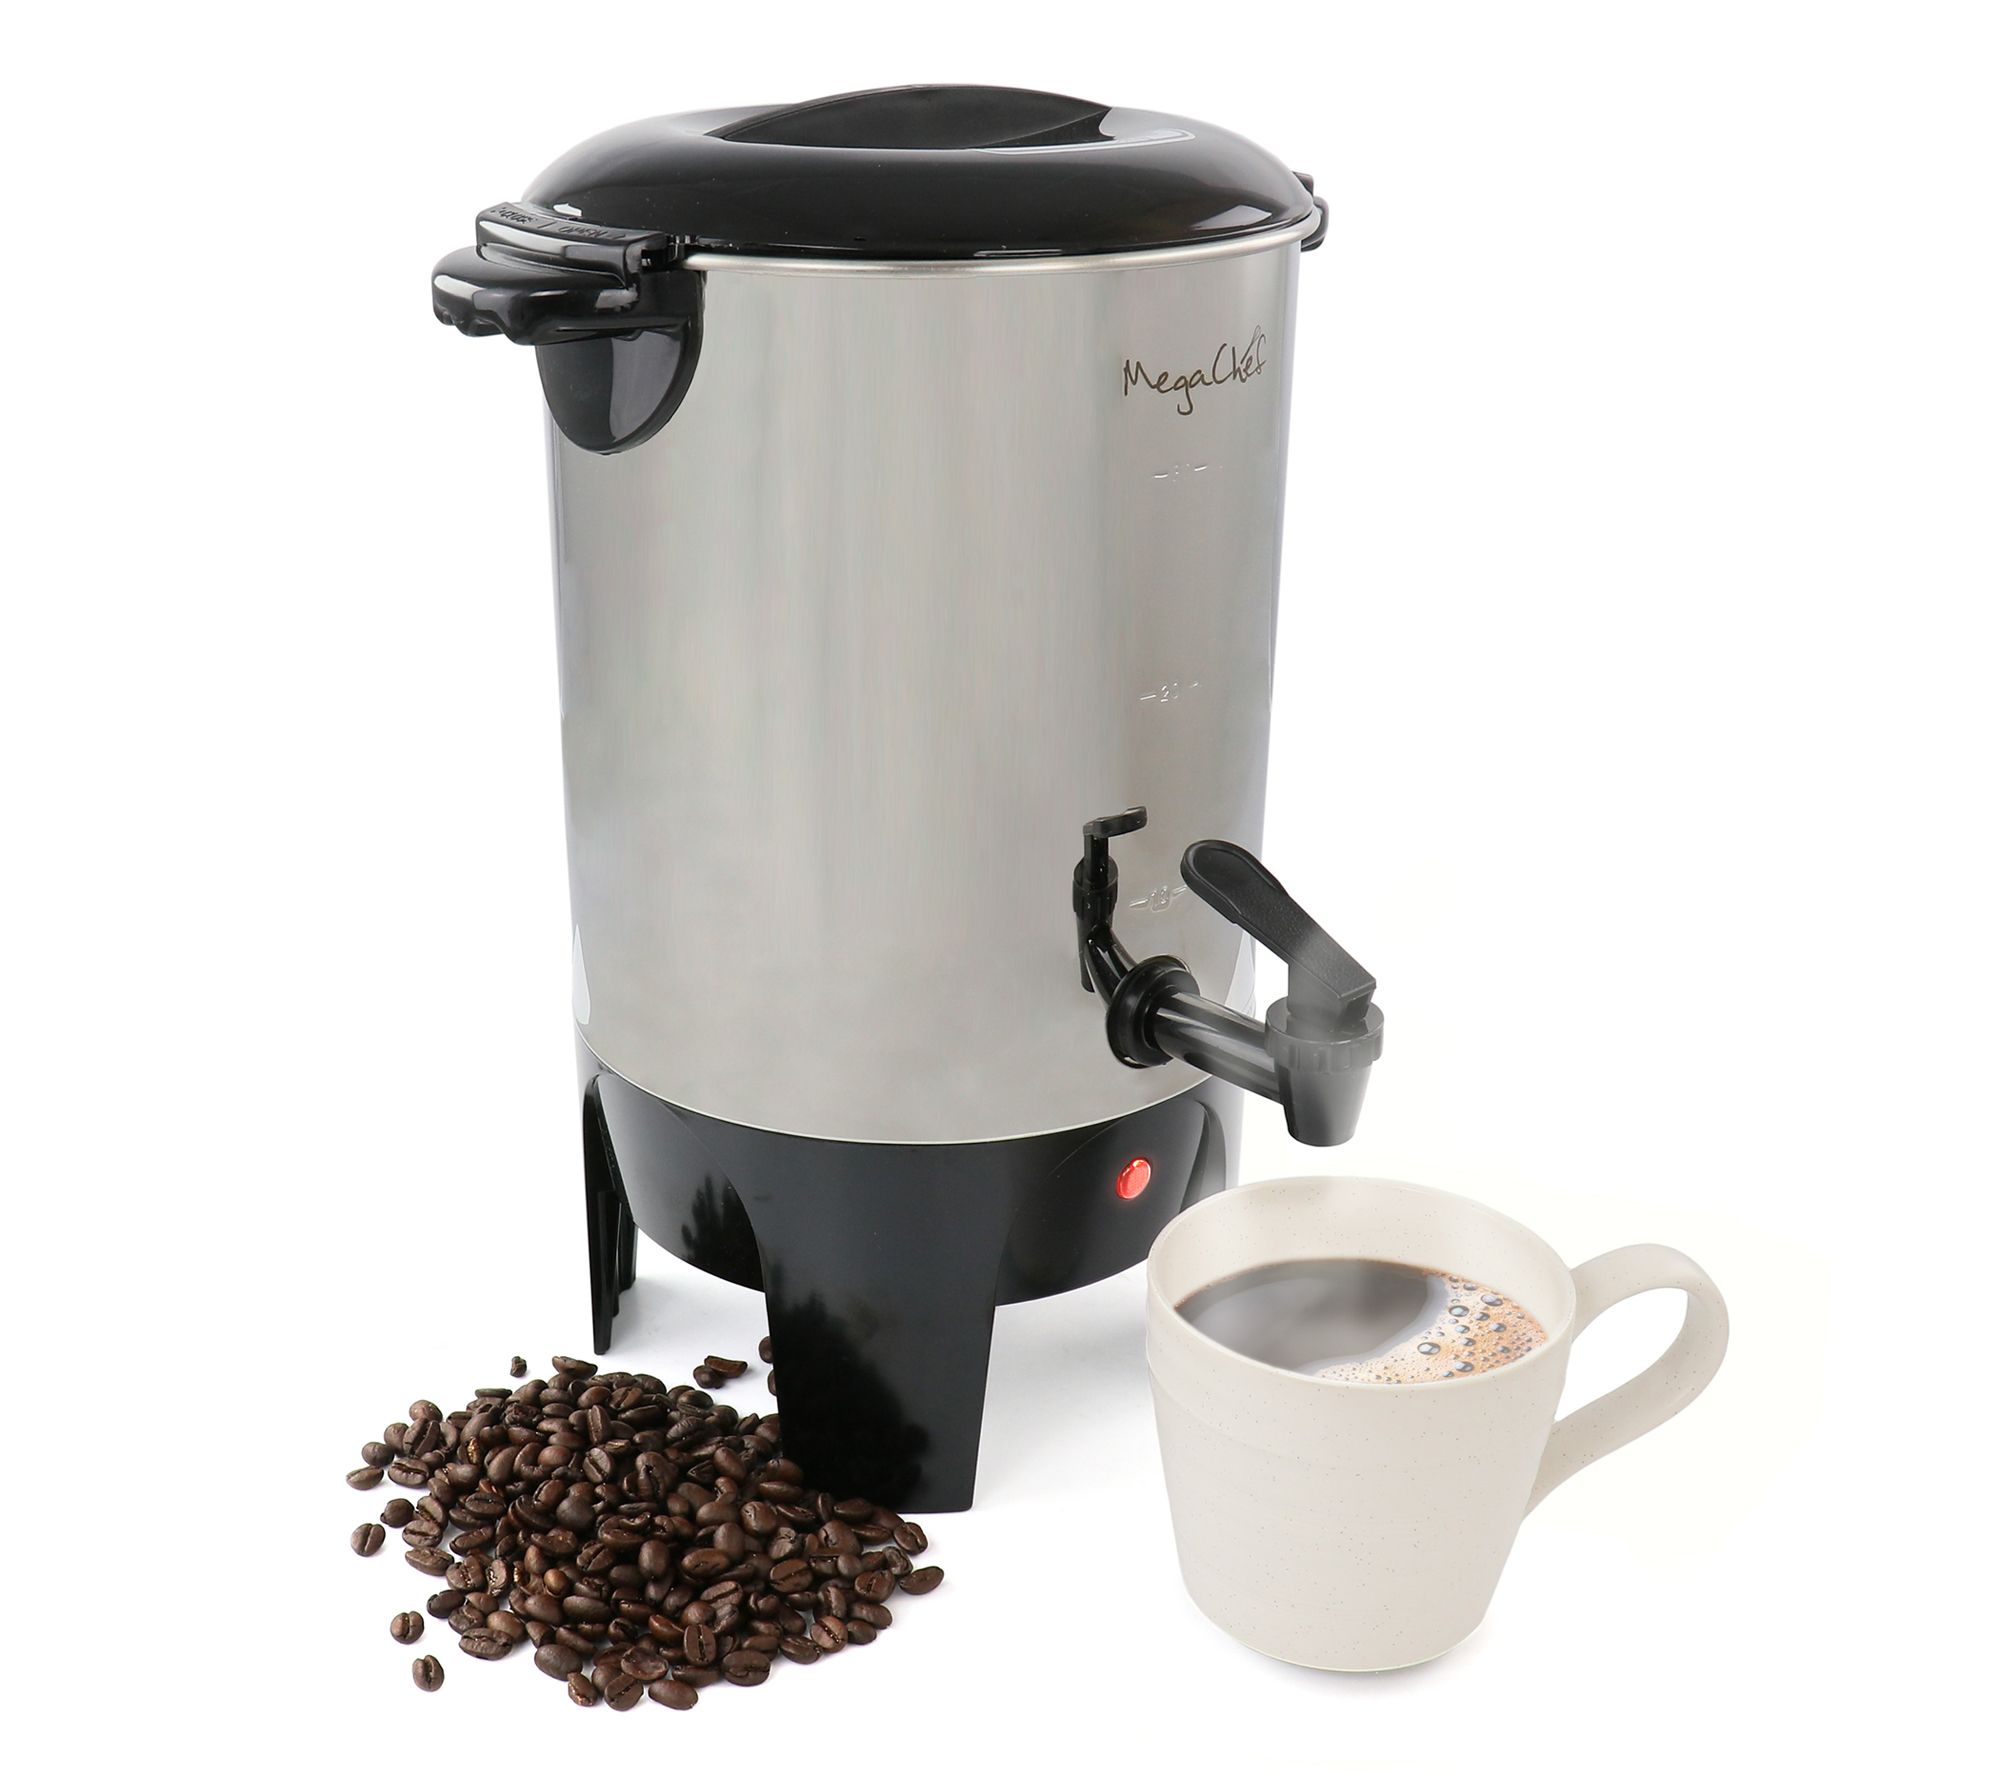 West Bend Large Capacity 55-Cup Coffee Maker, in Stainless Steel